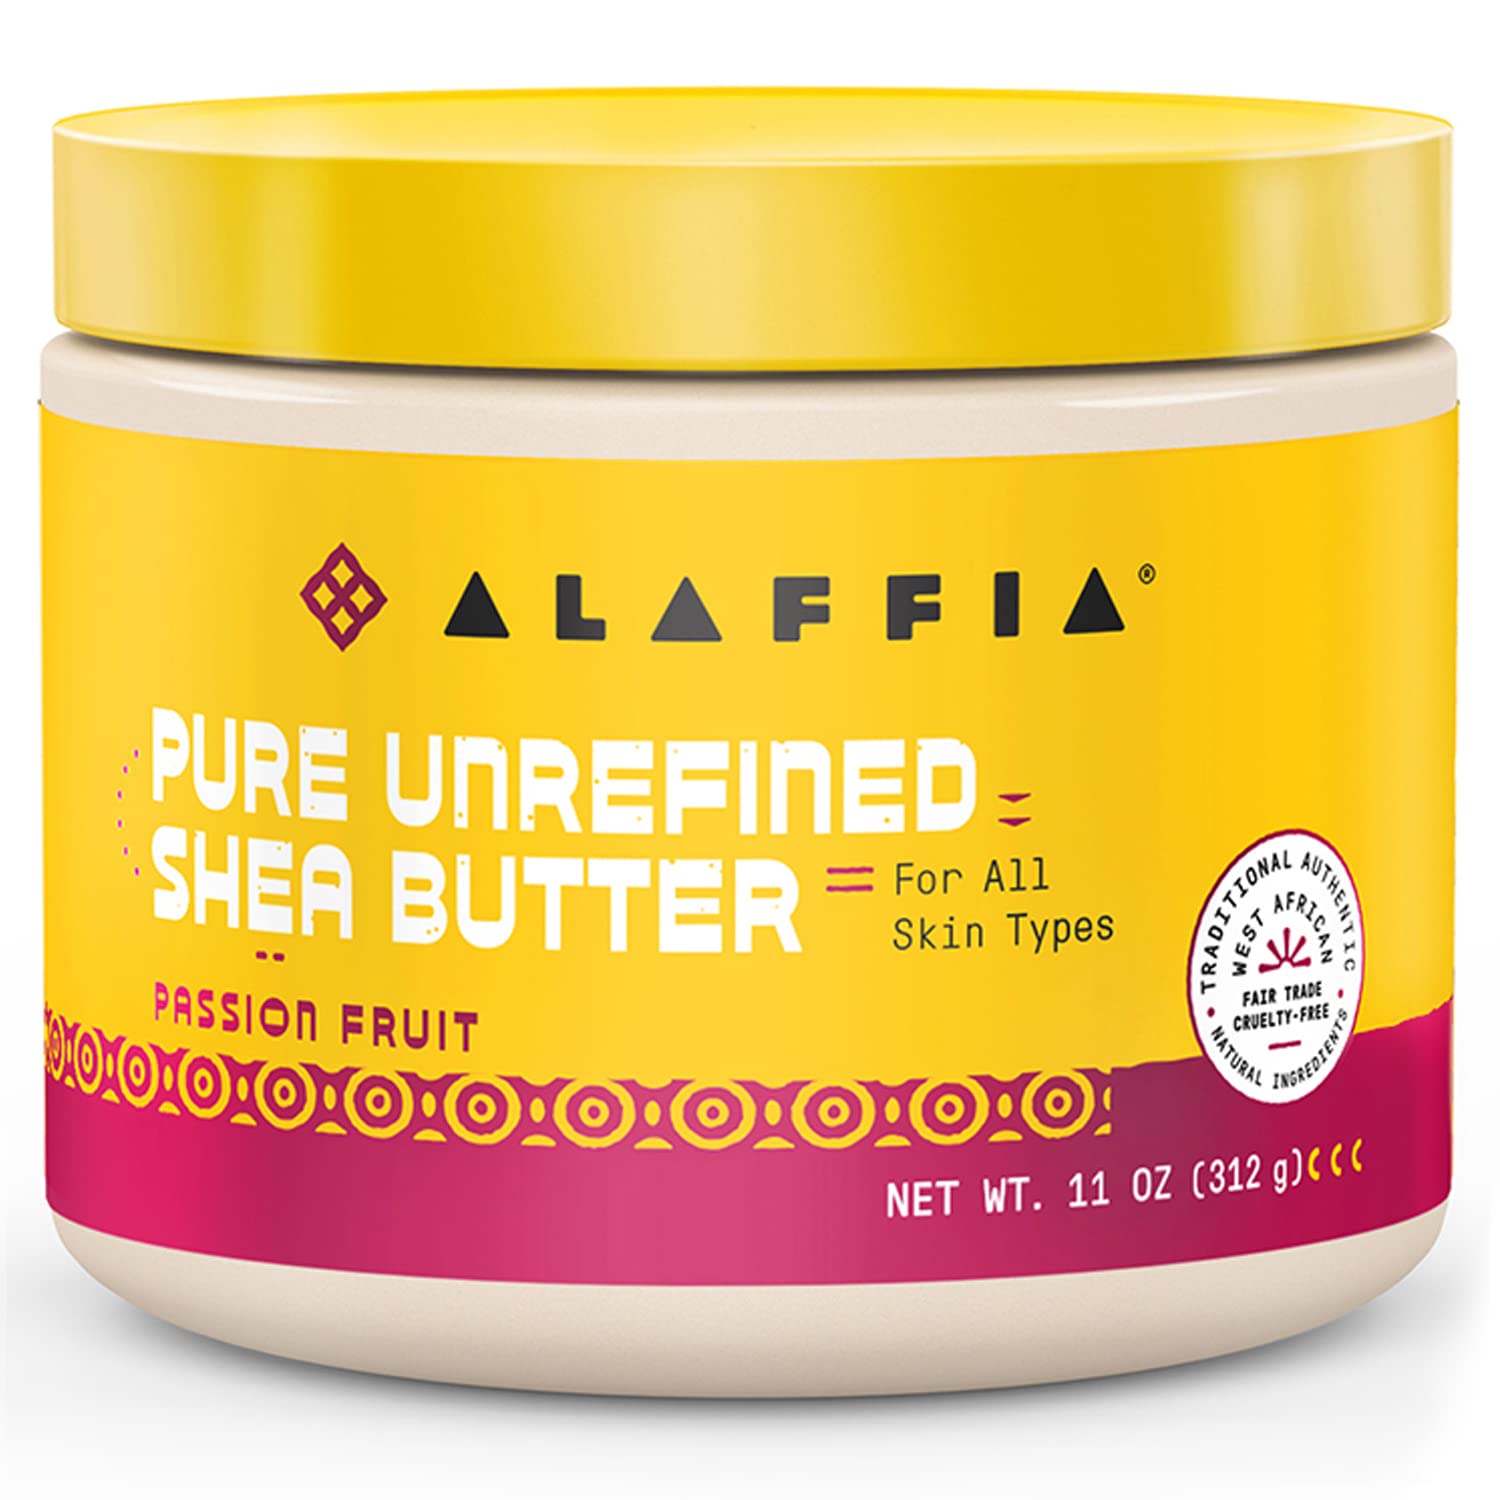 Alaffia Pure Unrefined Shea Butter with Passion Fruit, Pure Shea Butter Lotion, Moisture for Skin and Hair, Shea Body Butter Moisturizer, Face Moisturizer for Dry Skin, All Skin Types, 11 Oz